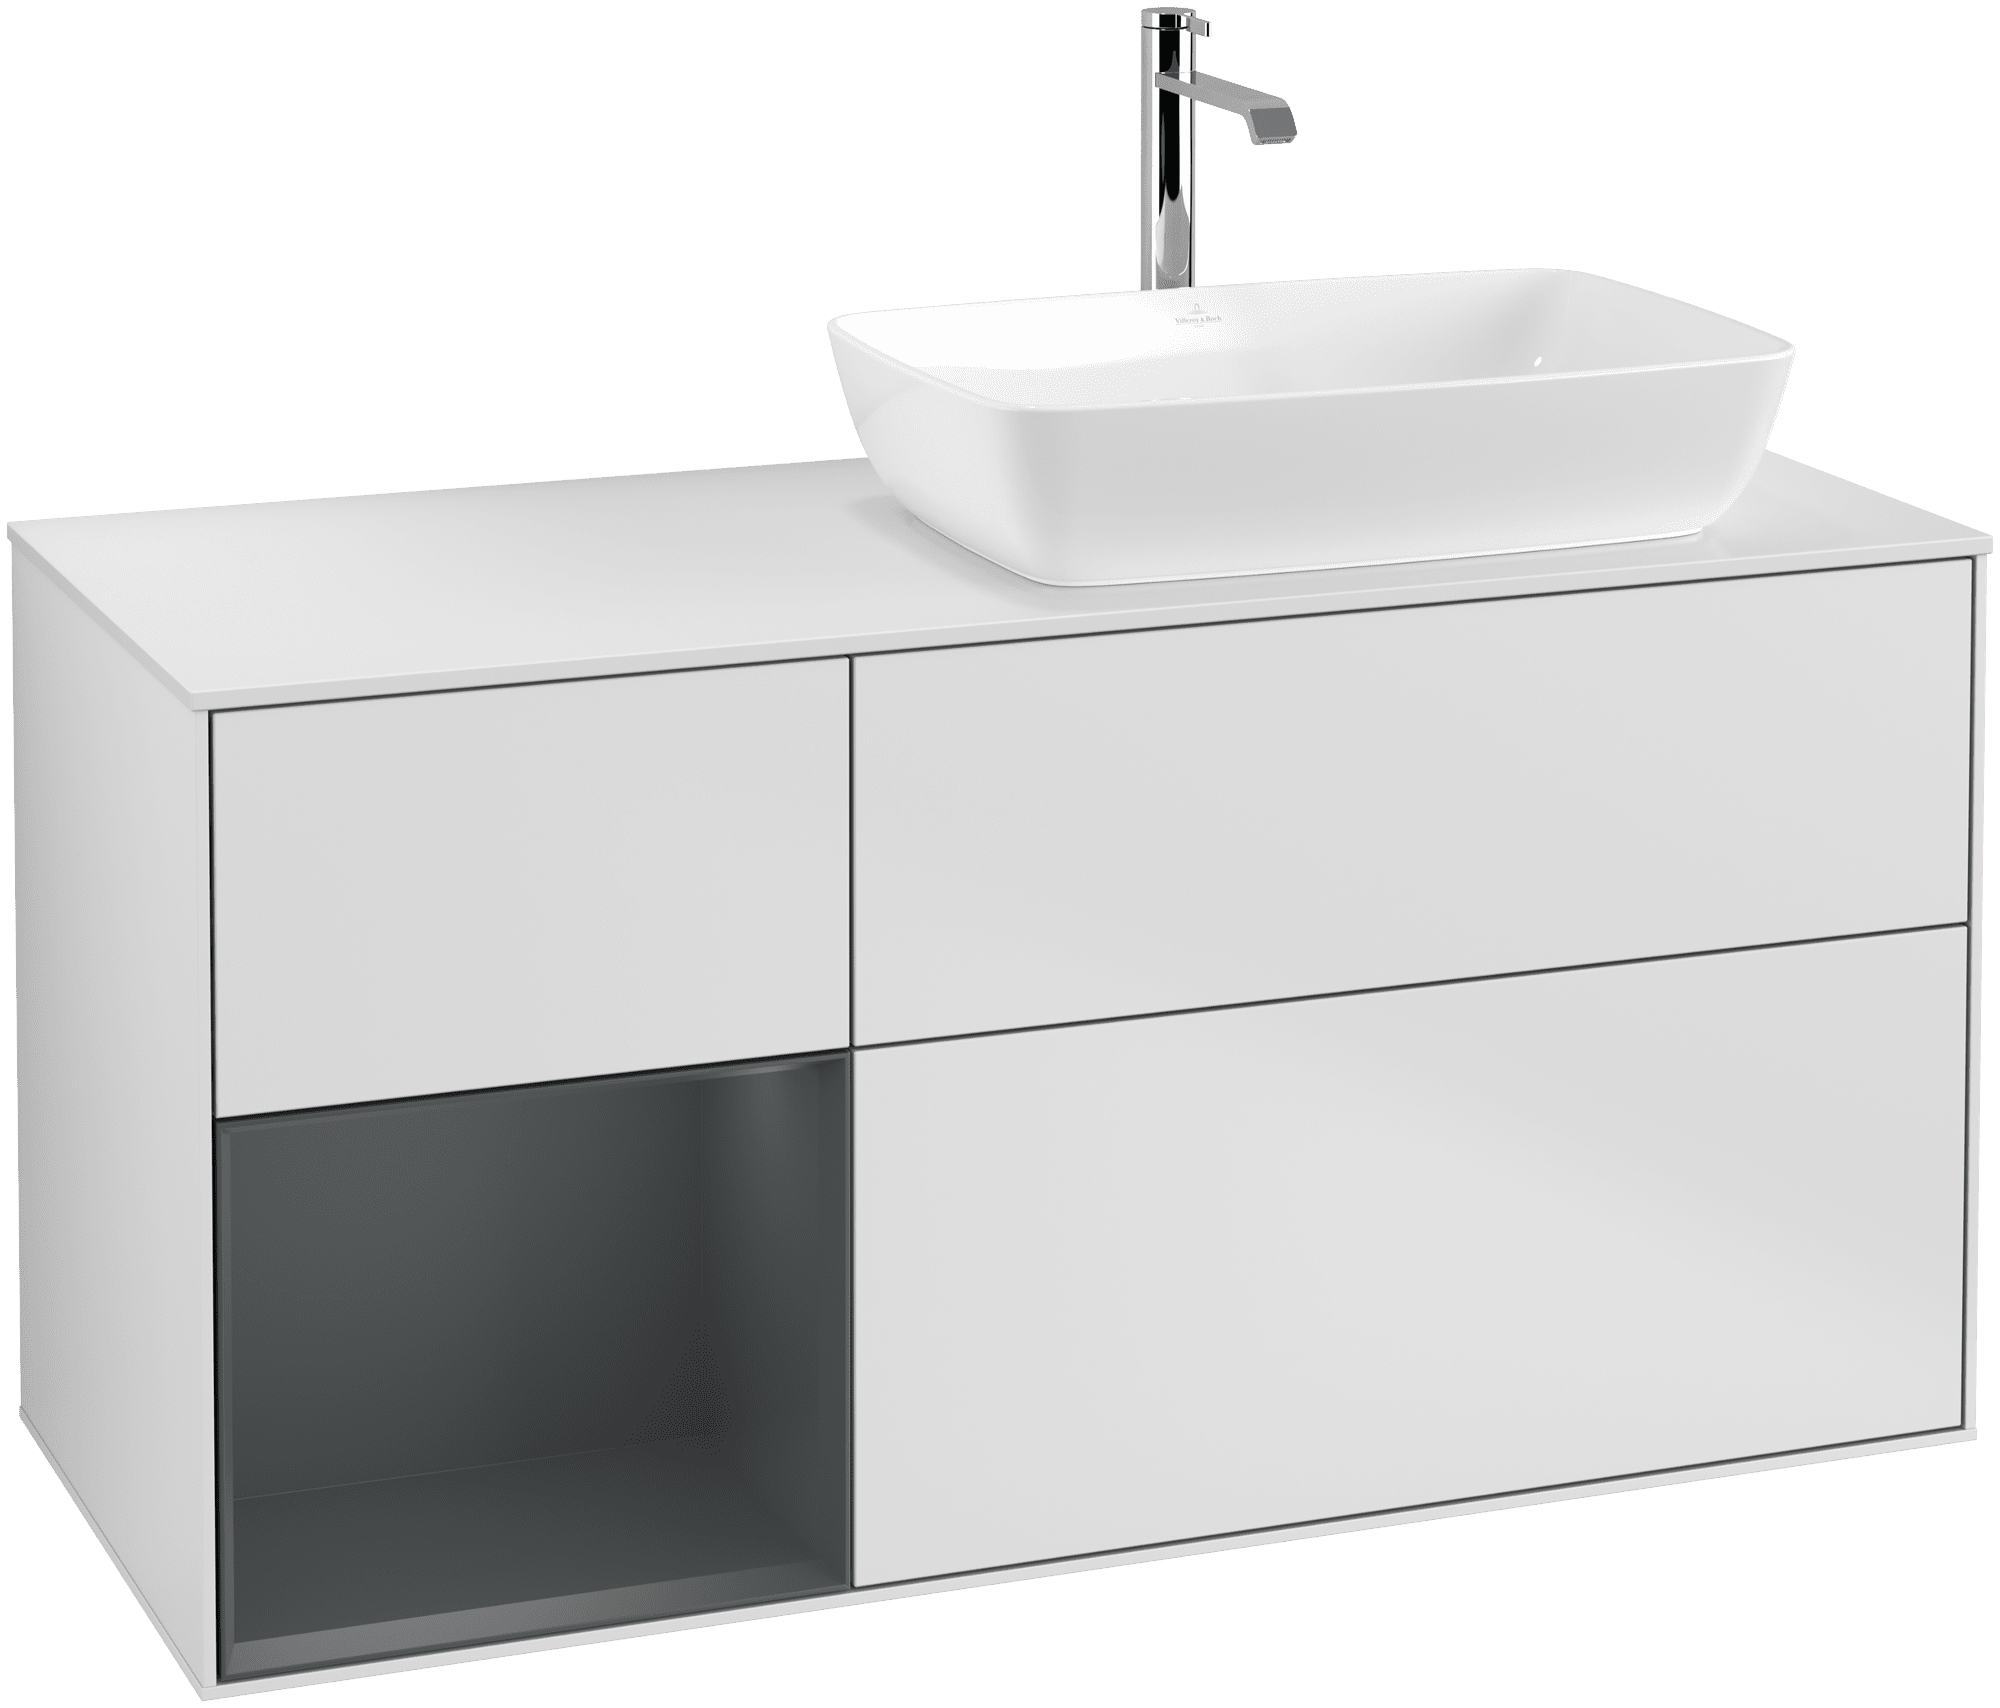 Picture of VILLEROY BOCH Finion Vanity unit, with lighting, 3 pull-out compartments, 1200 x 603 x 501 mm, White Matt Lacquer / Midnight Blue Matt Lacquer / Glass White Matt #G801HGMT